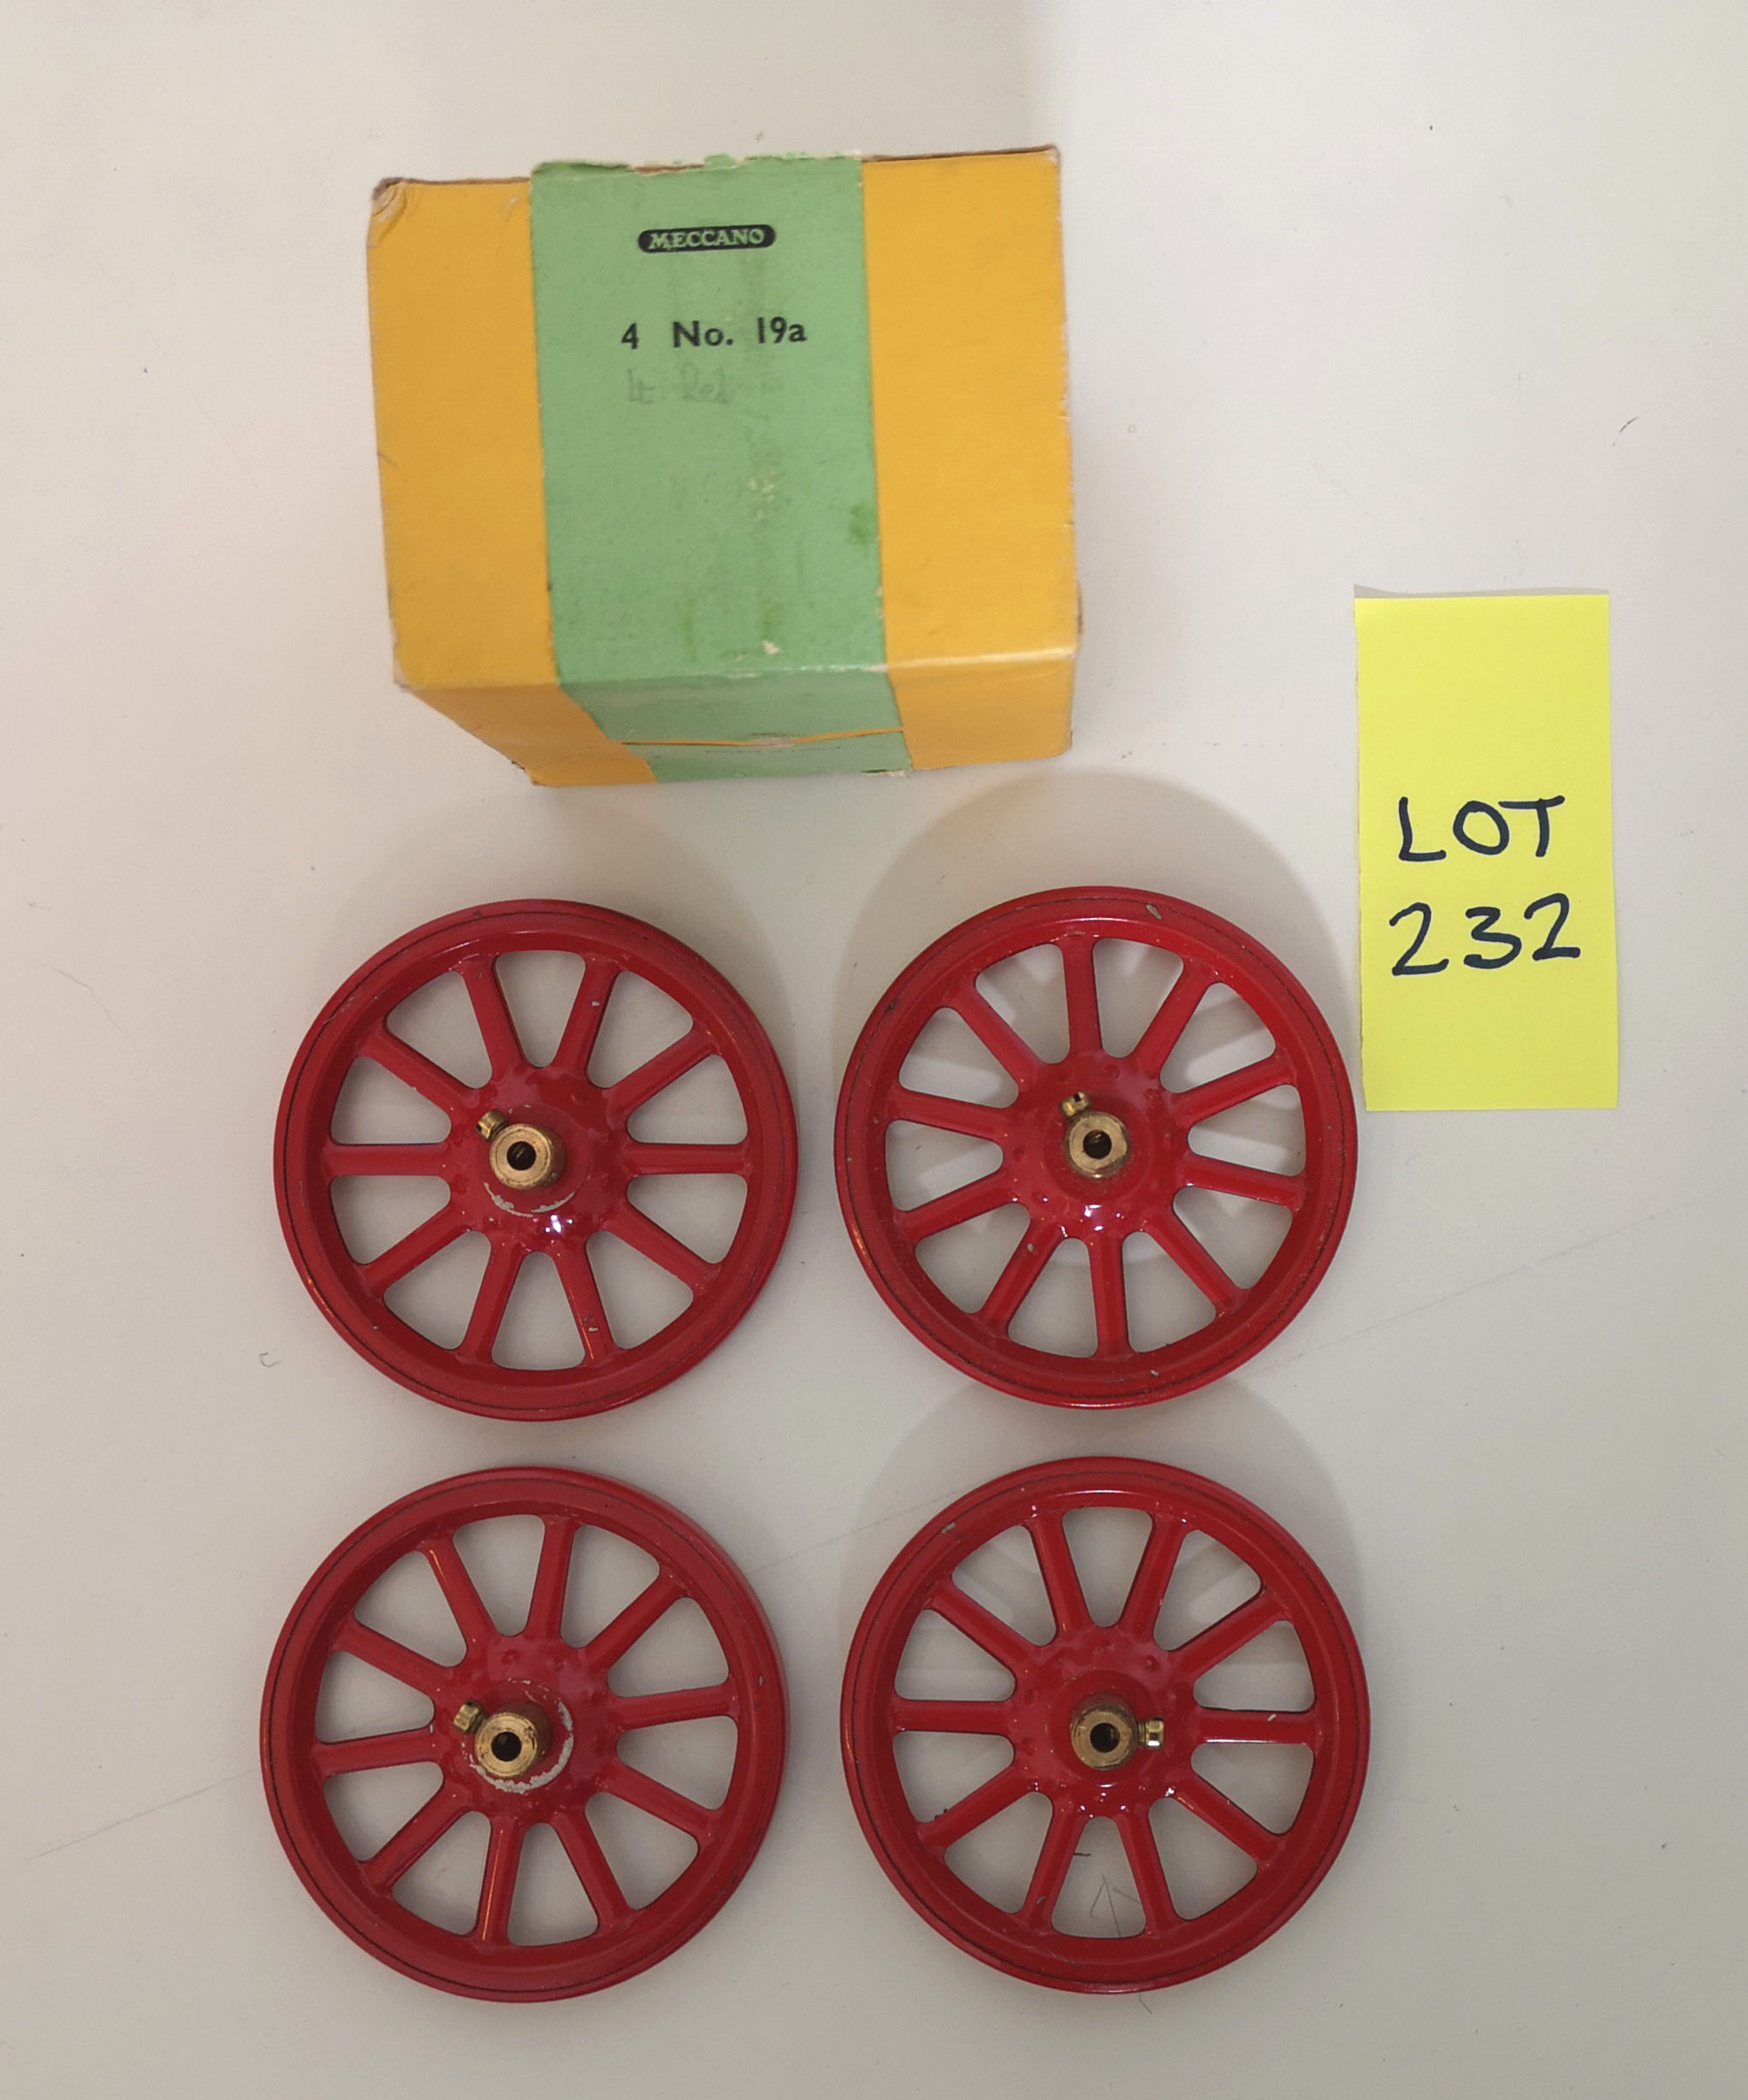 LOT 232 - Four 19a Spoked Wheels